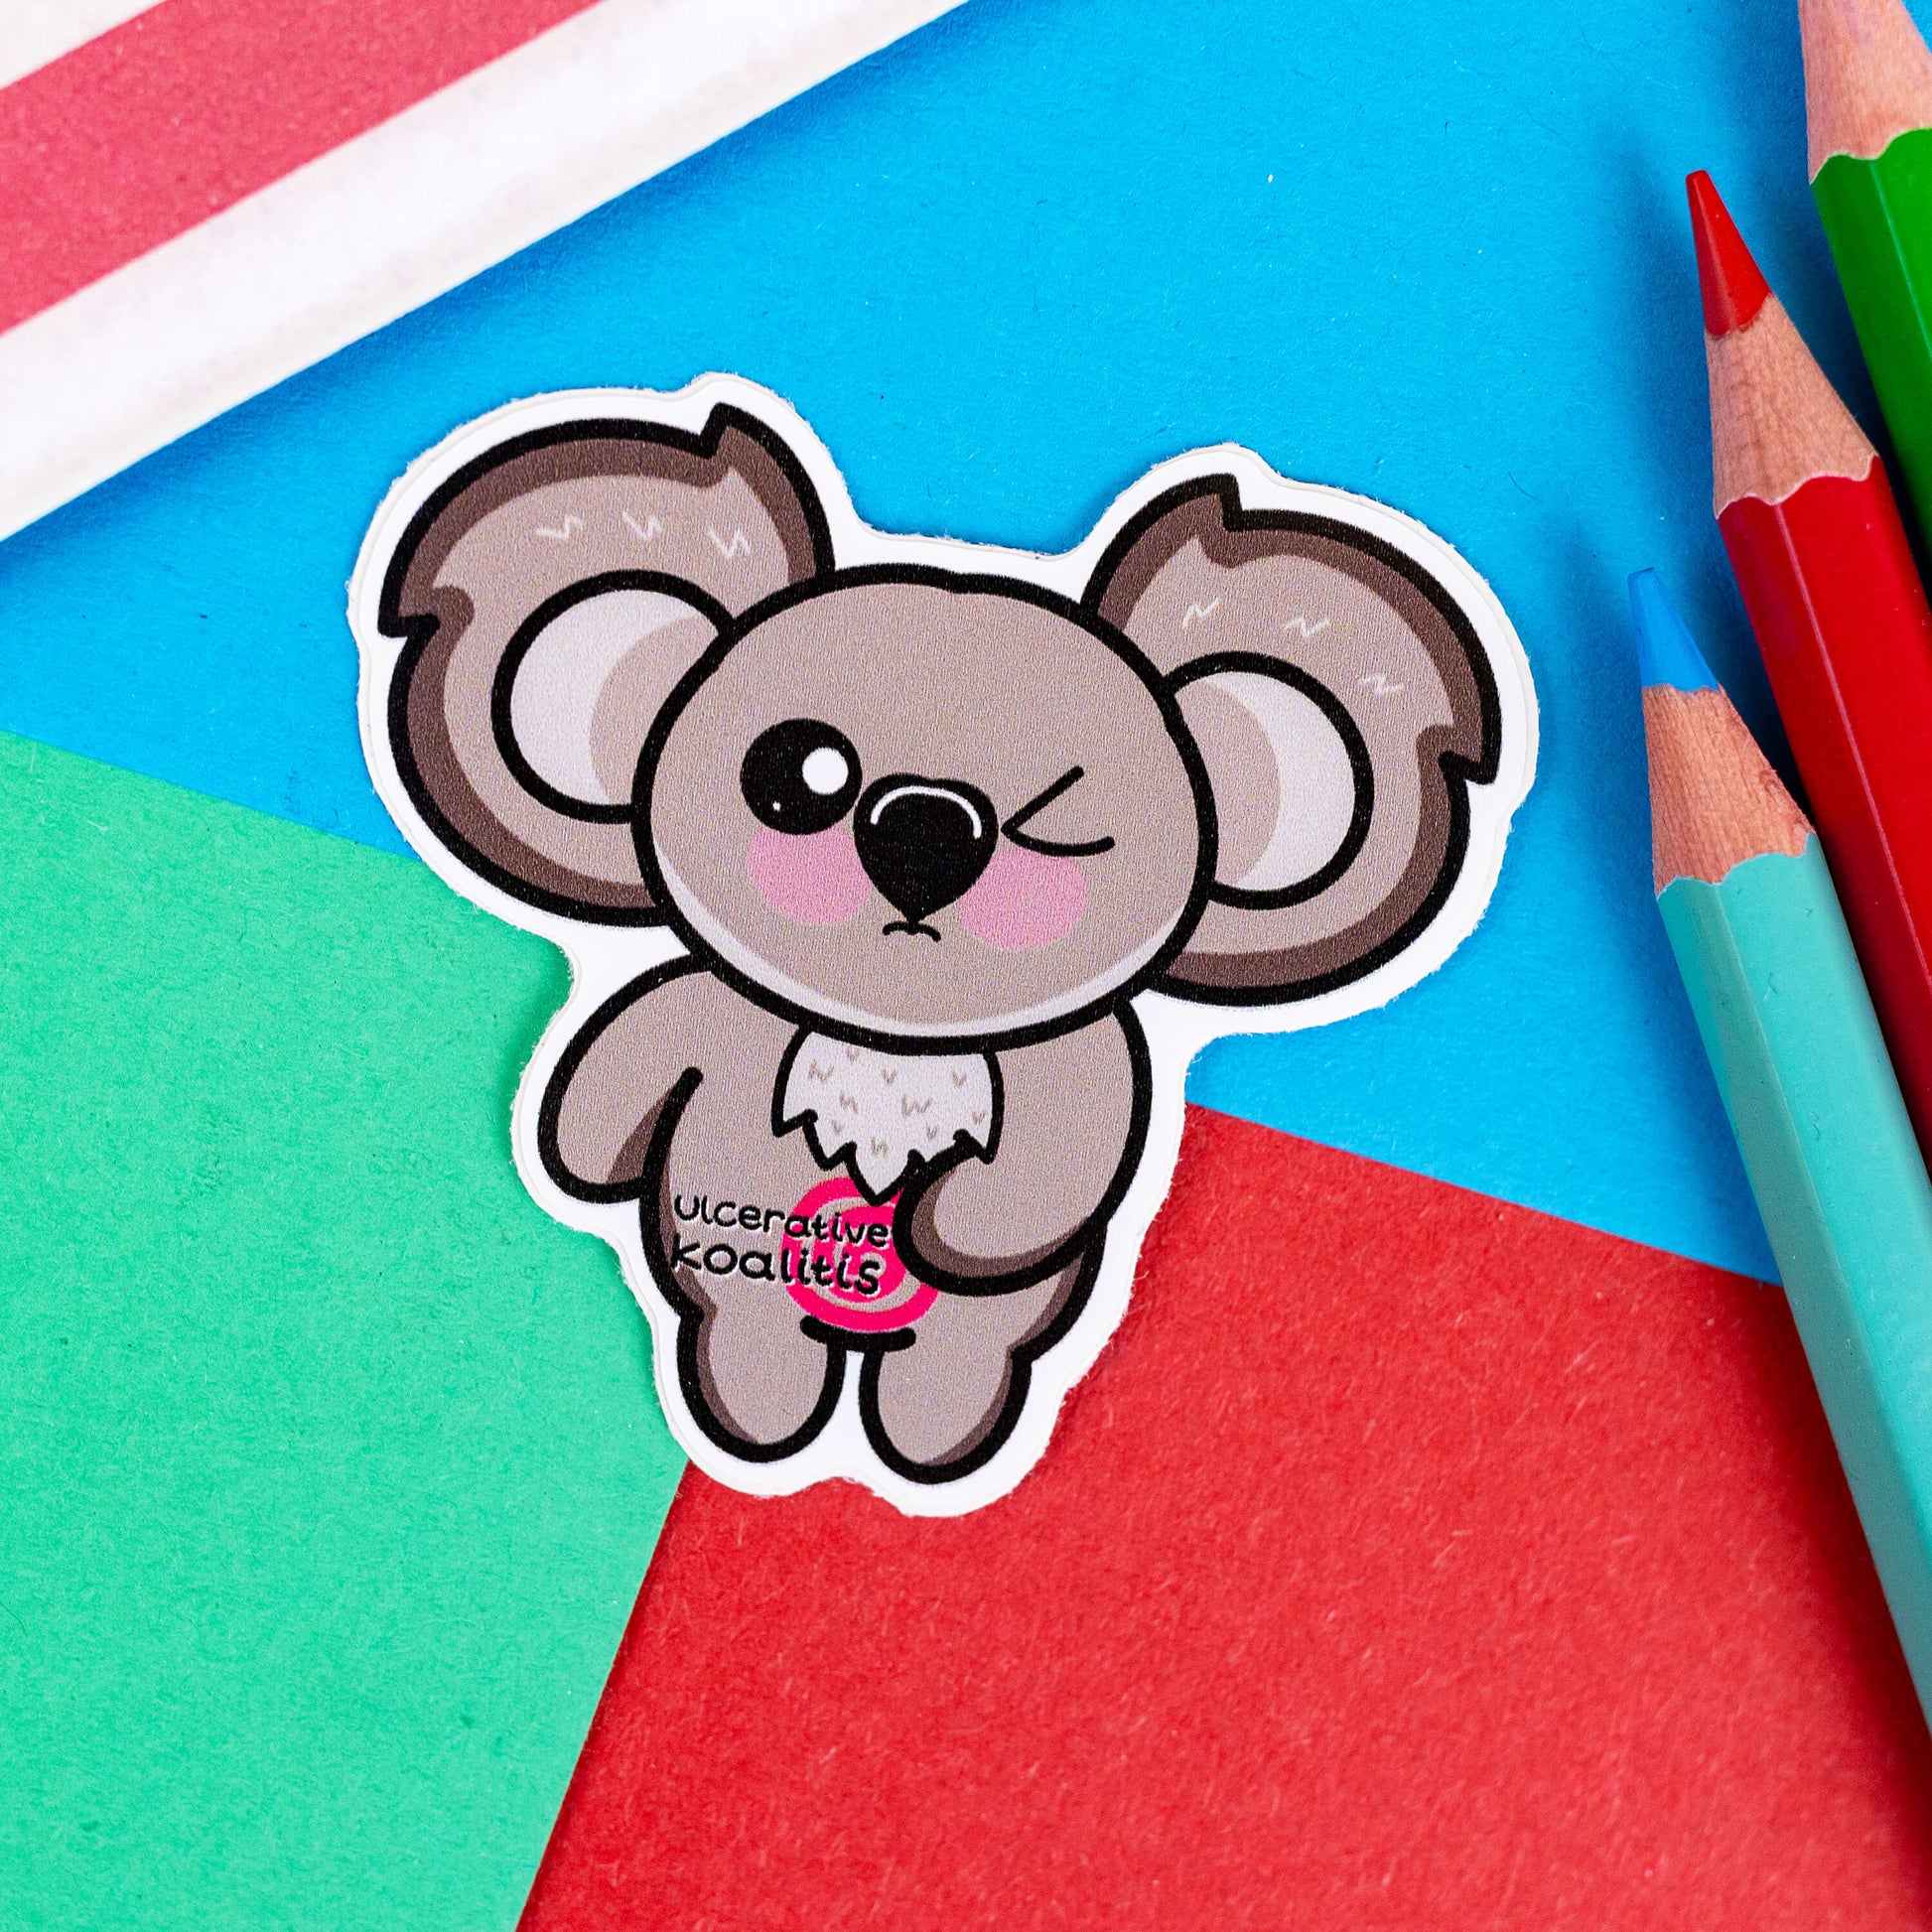 Cute koala with big ears and one eye closed, clutching its stomach with text saying also ulcerative koalitis on a green, blue and red background